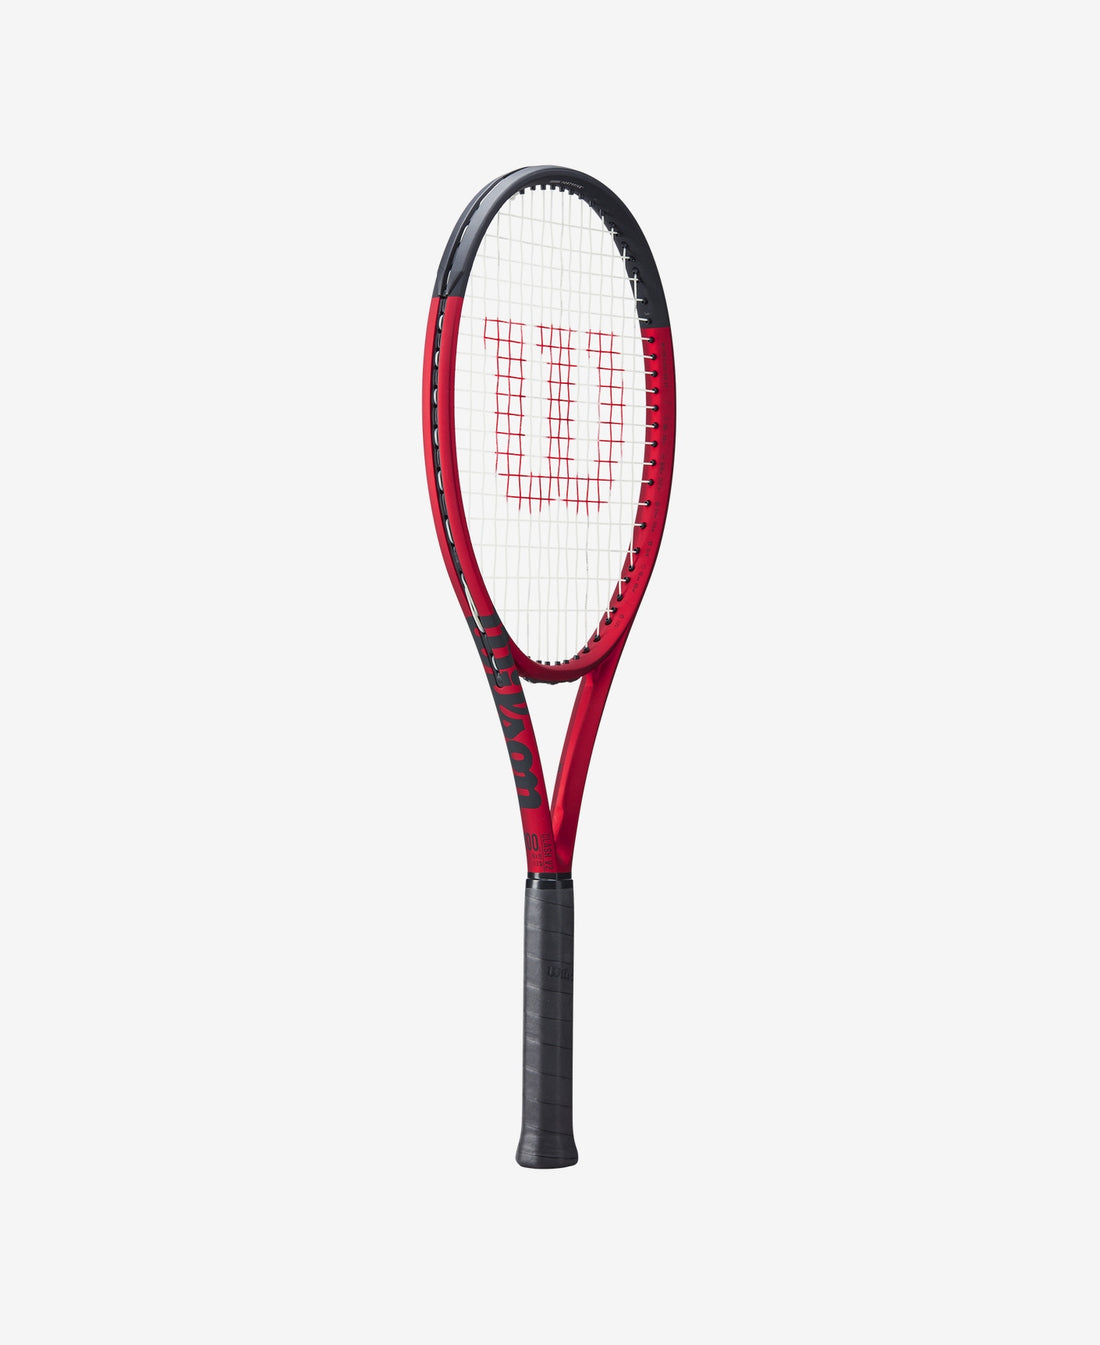 Wilson Clash 100L V2 Tennis Racket with Red and Black Anodized Finish